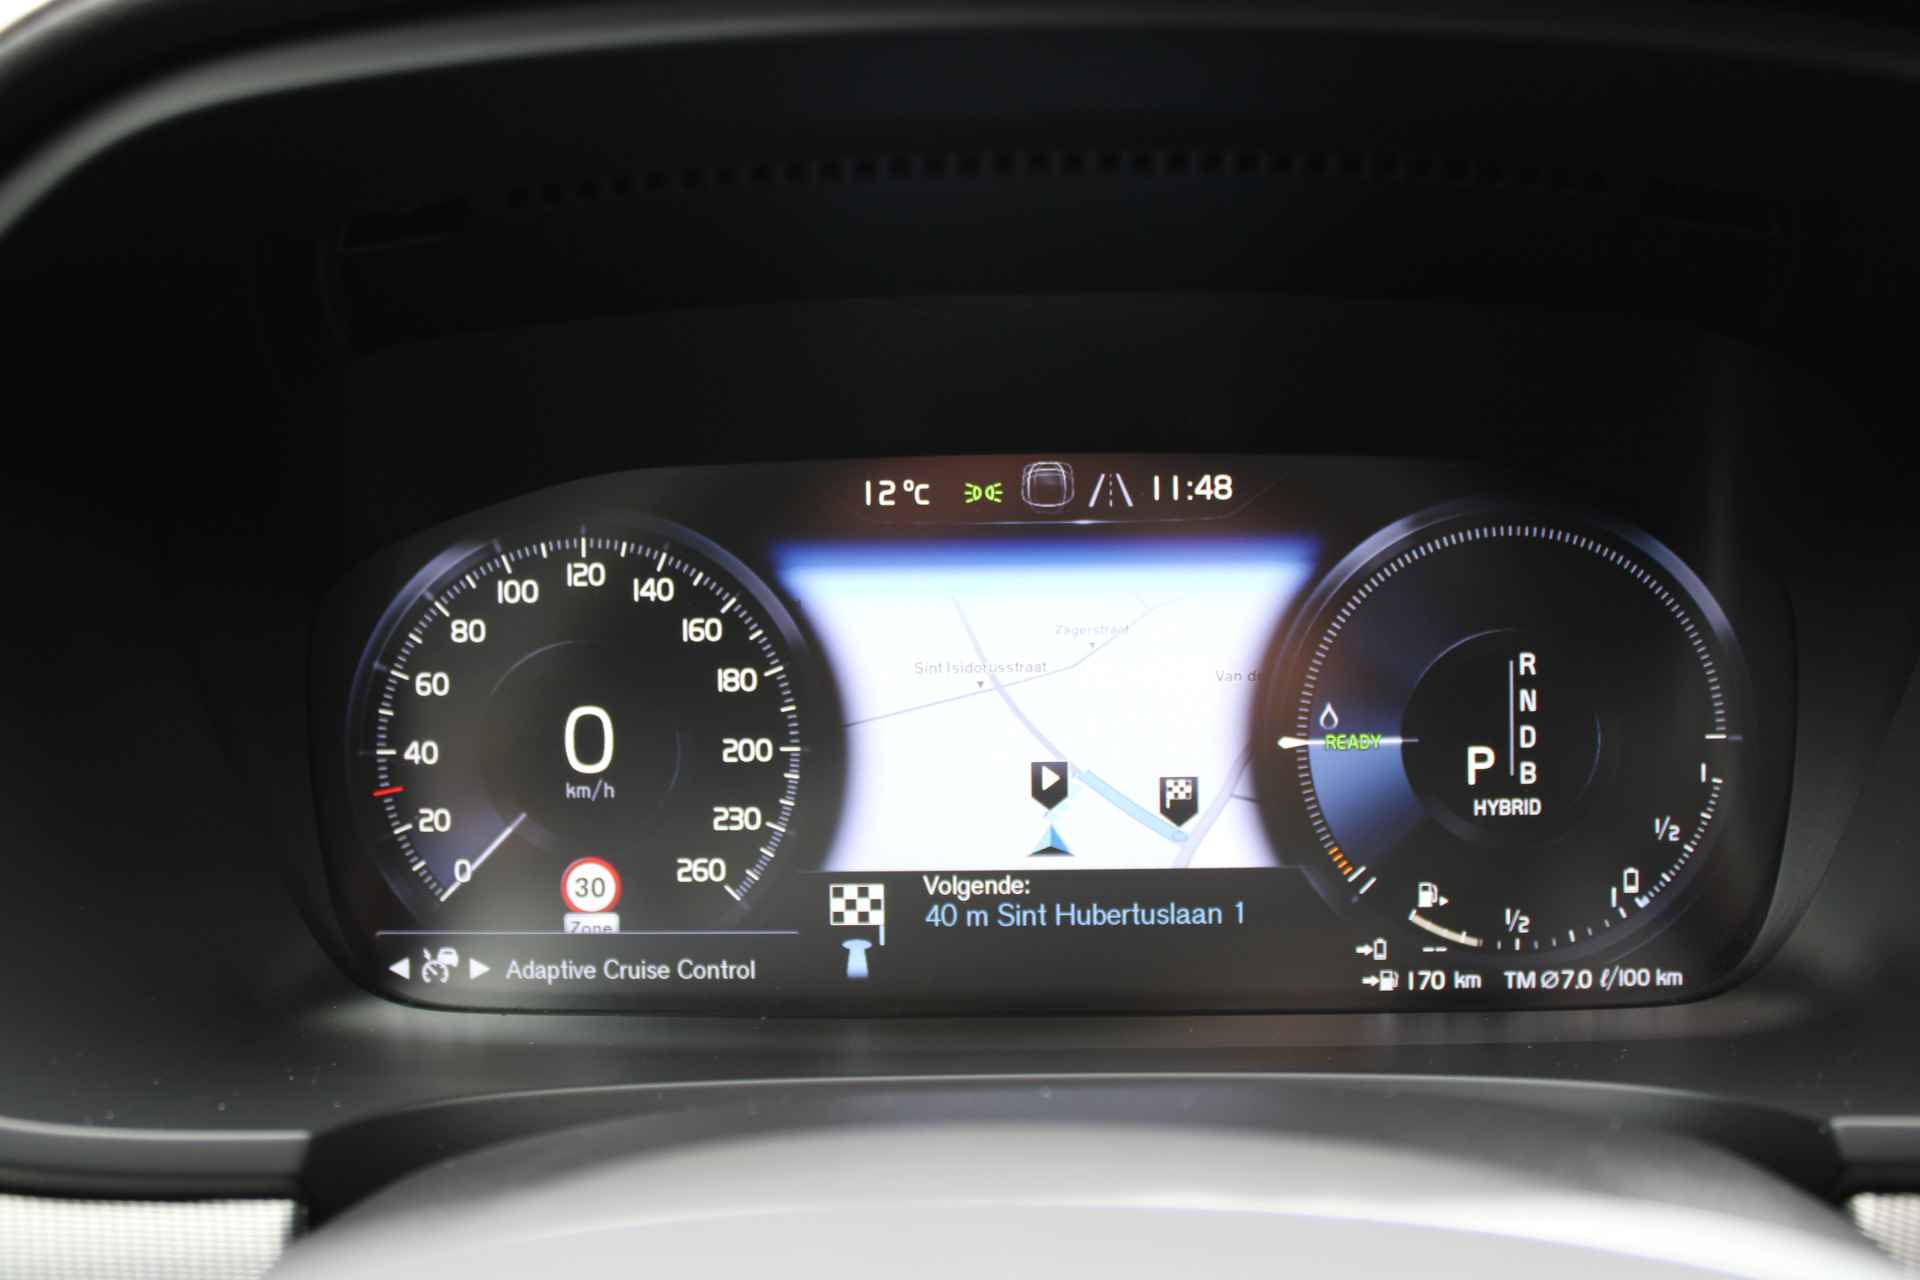 Volvo S90 2.0 T8 AWD R-DESIGN GEARTRONIC SCHUIFDAK 360 CAMERA- HEAD UP DISPLAY- BOWERS & WILKINS SOUND - 8/36